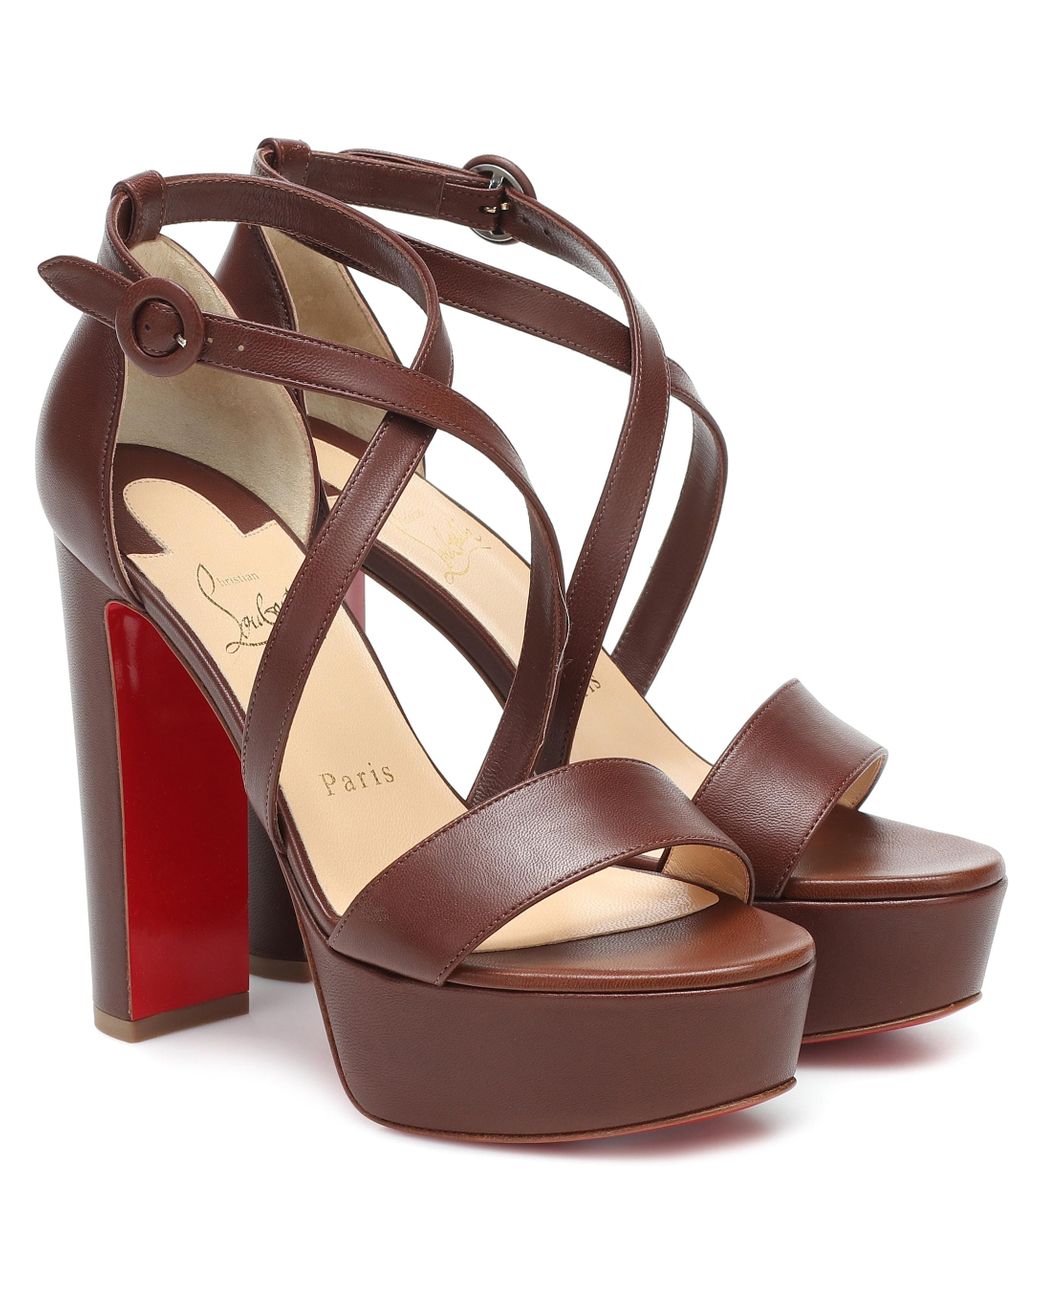 Christian Louboutin Loubi Bee Alta Leather Platform Sandals in Brown - Lyst